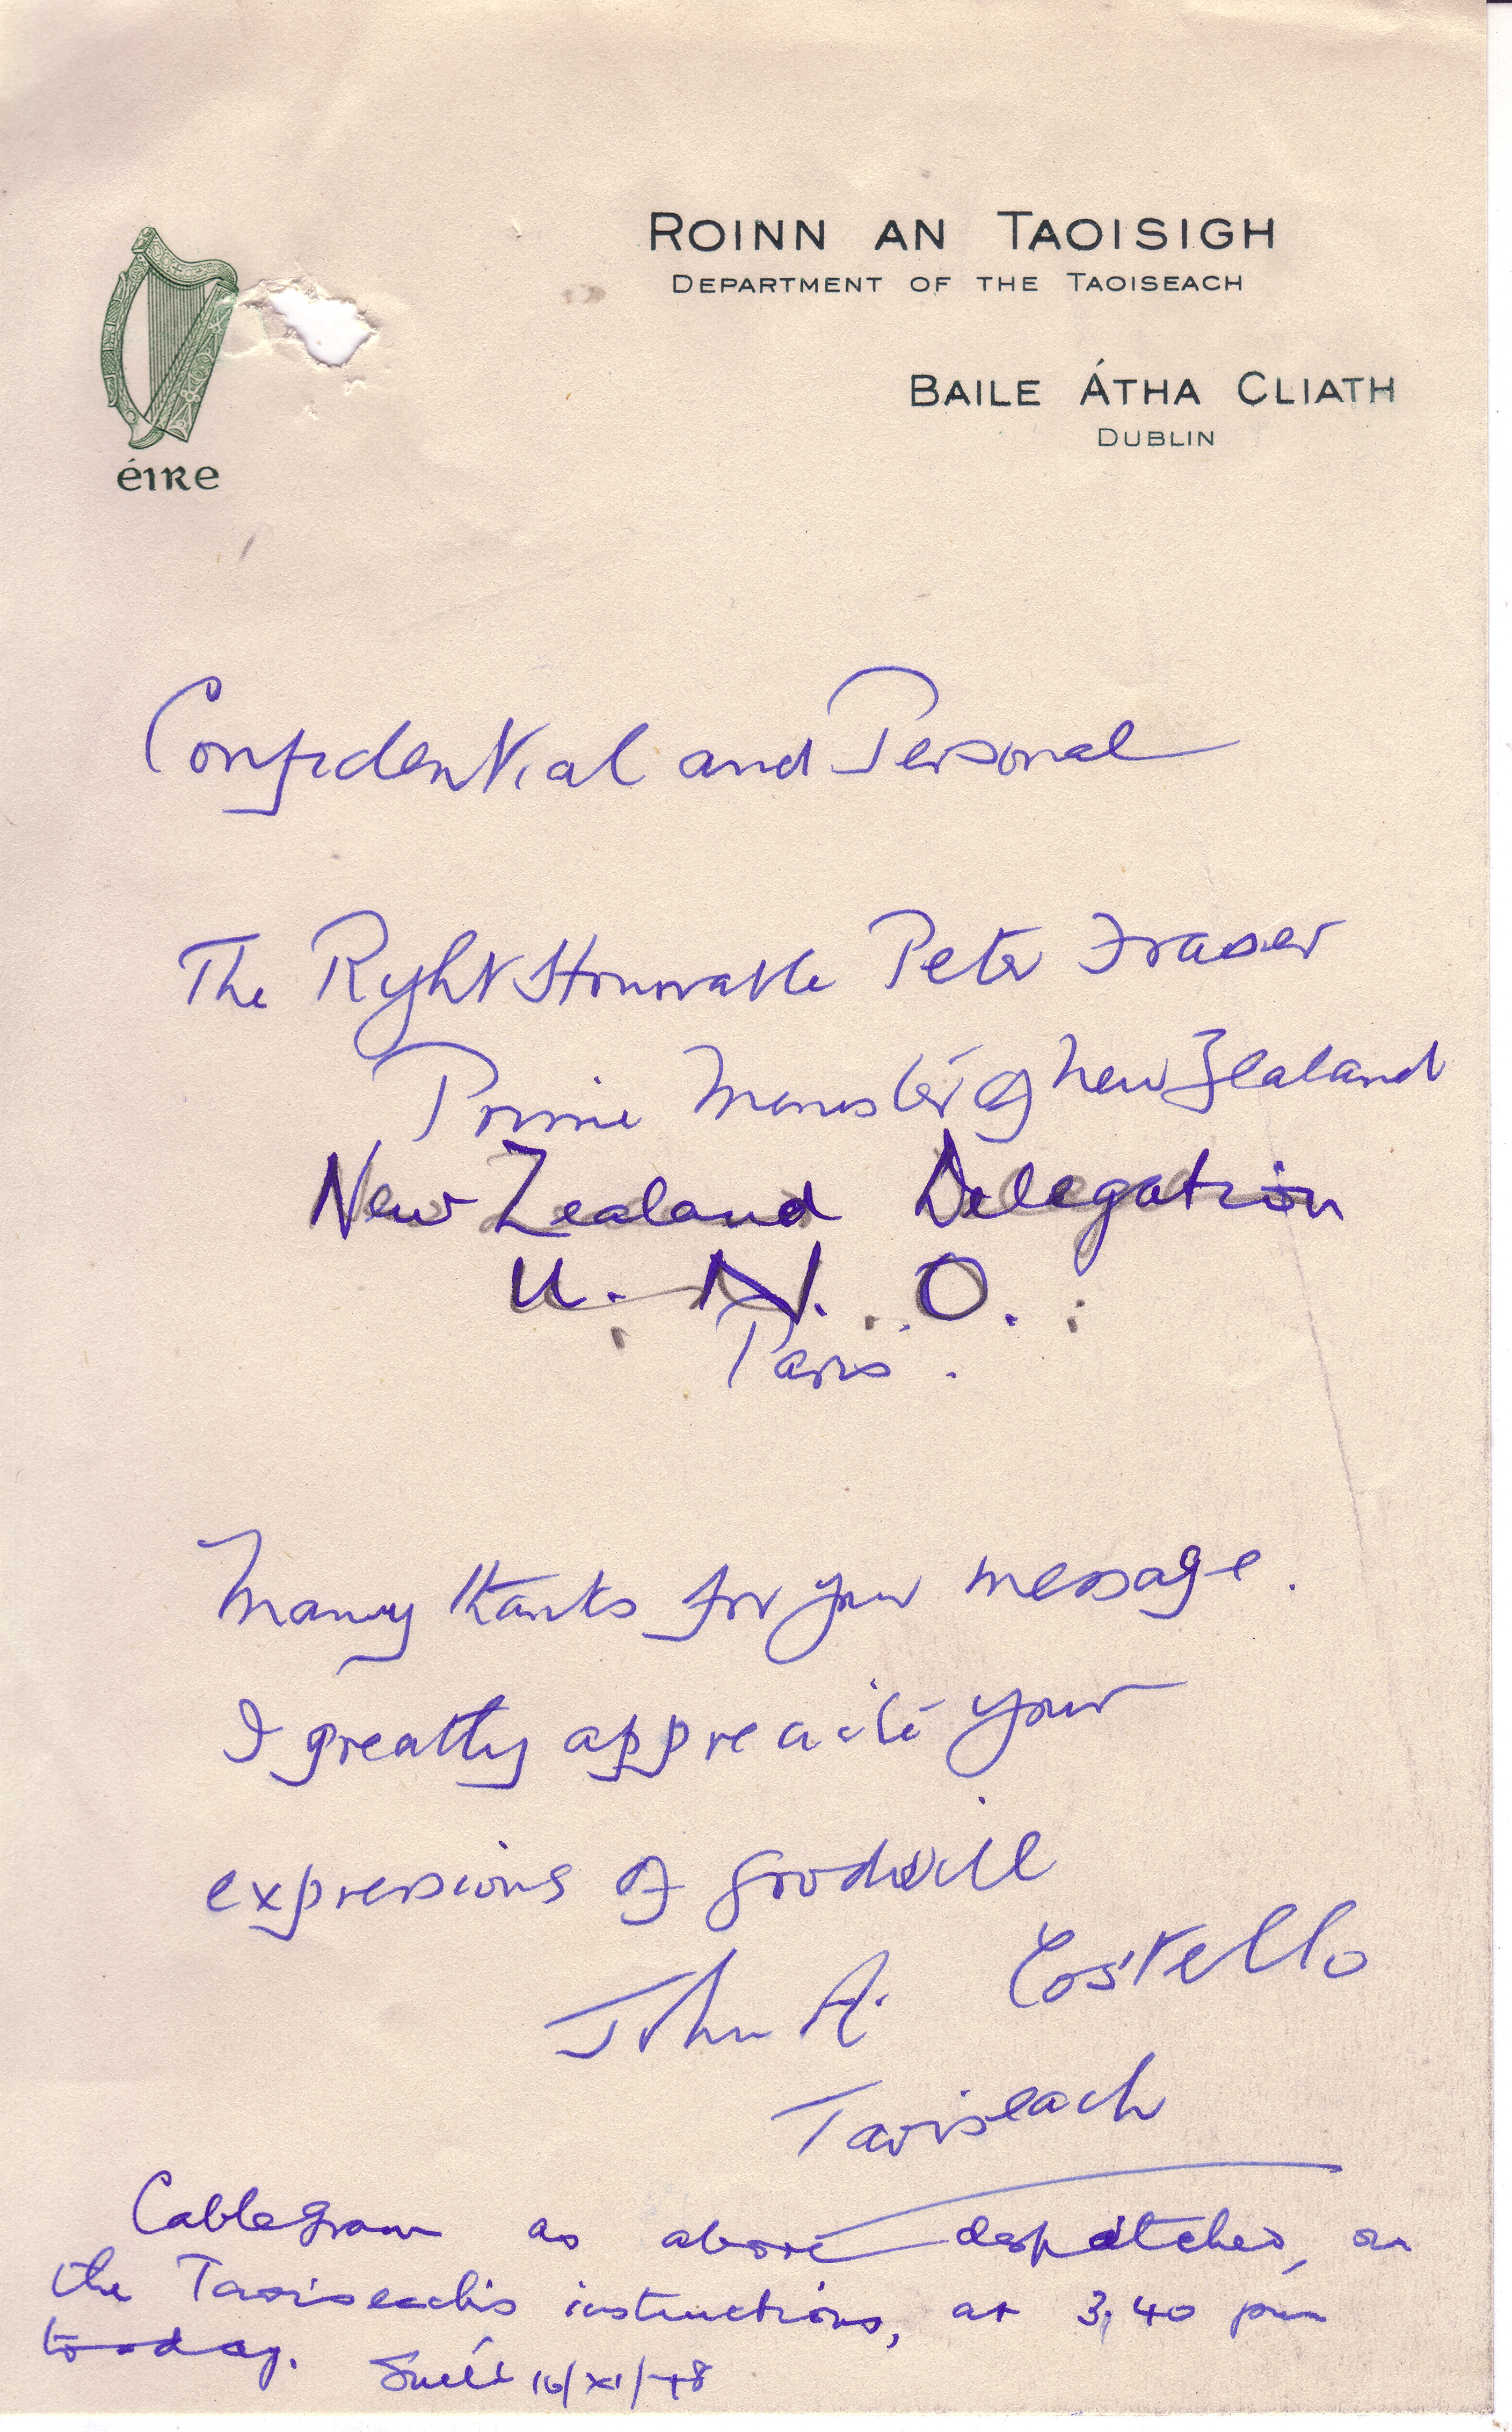 Facsimile of draft letter from John A. Costello to Peter Fraser